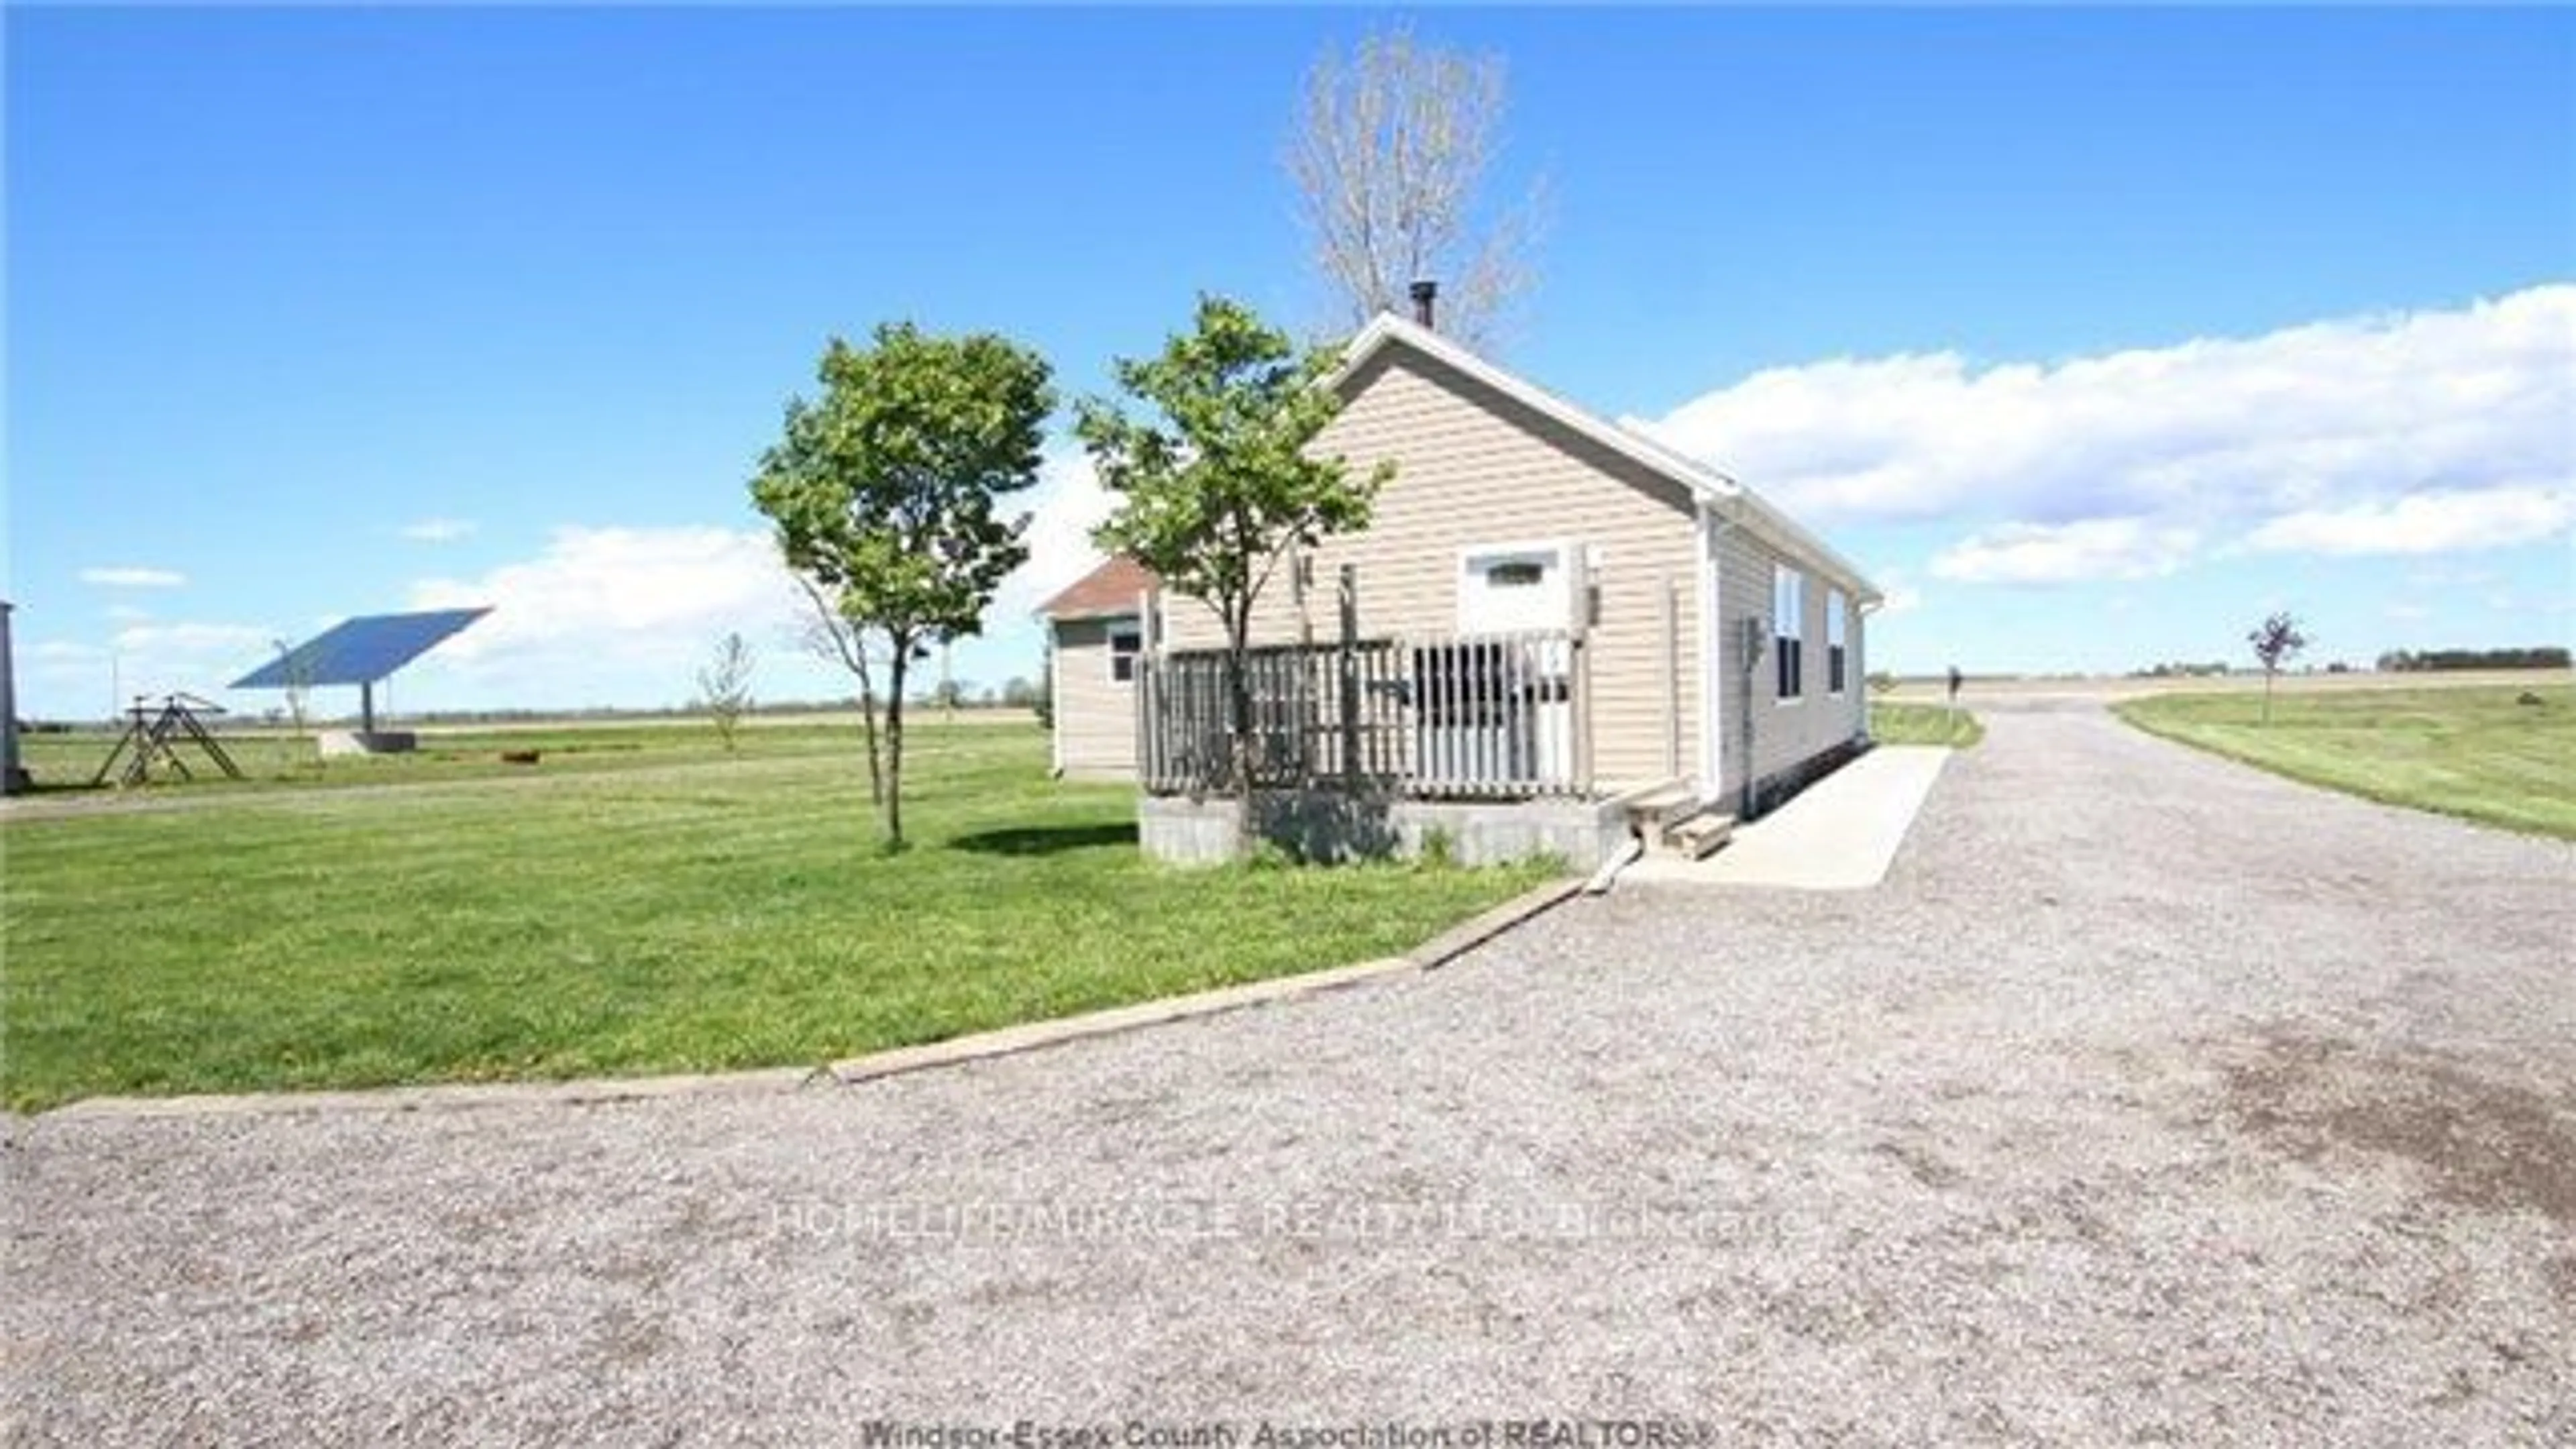 Cottage for 23378 Jeanette's Creek Rd, Chatham-Kent Ontario N0P 2L0